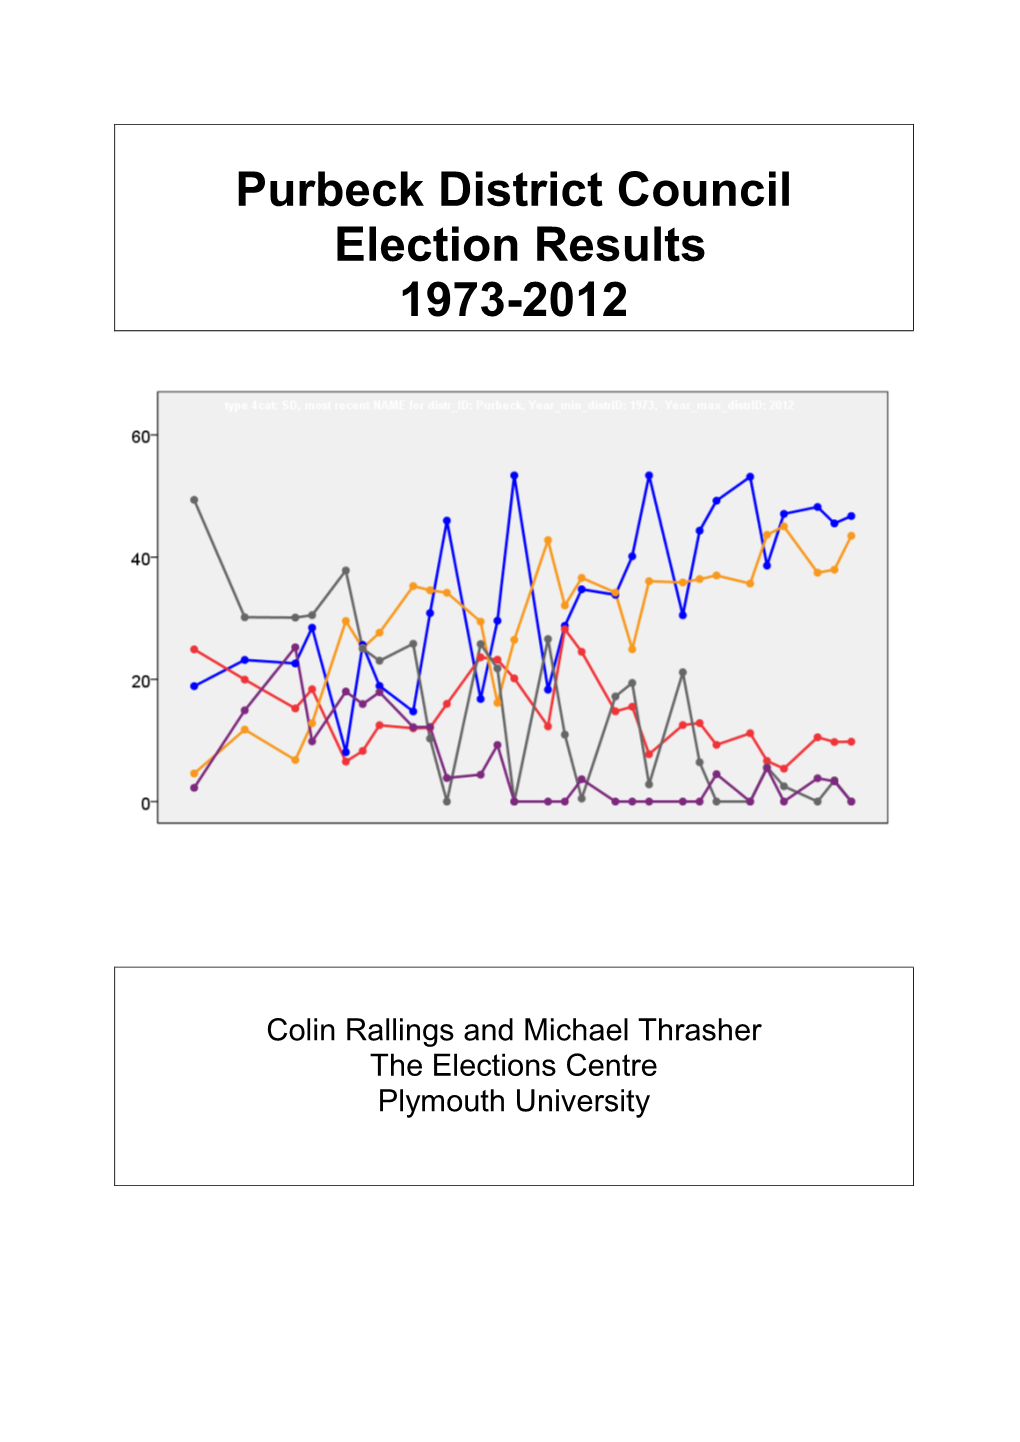 Purbeck District Council Election Results 1973-2012